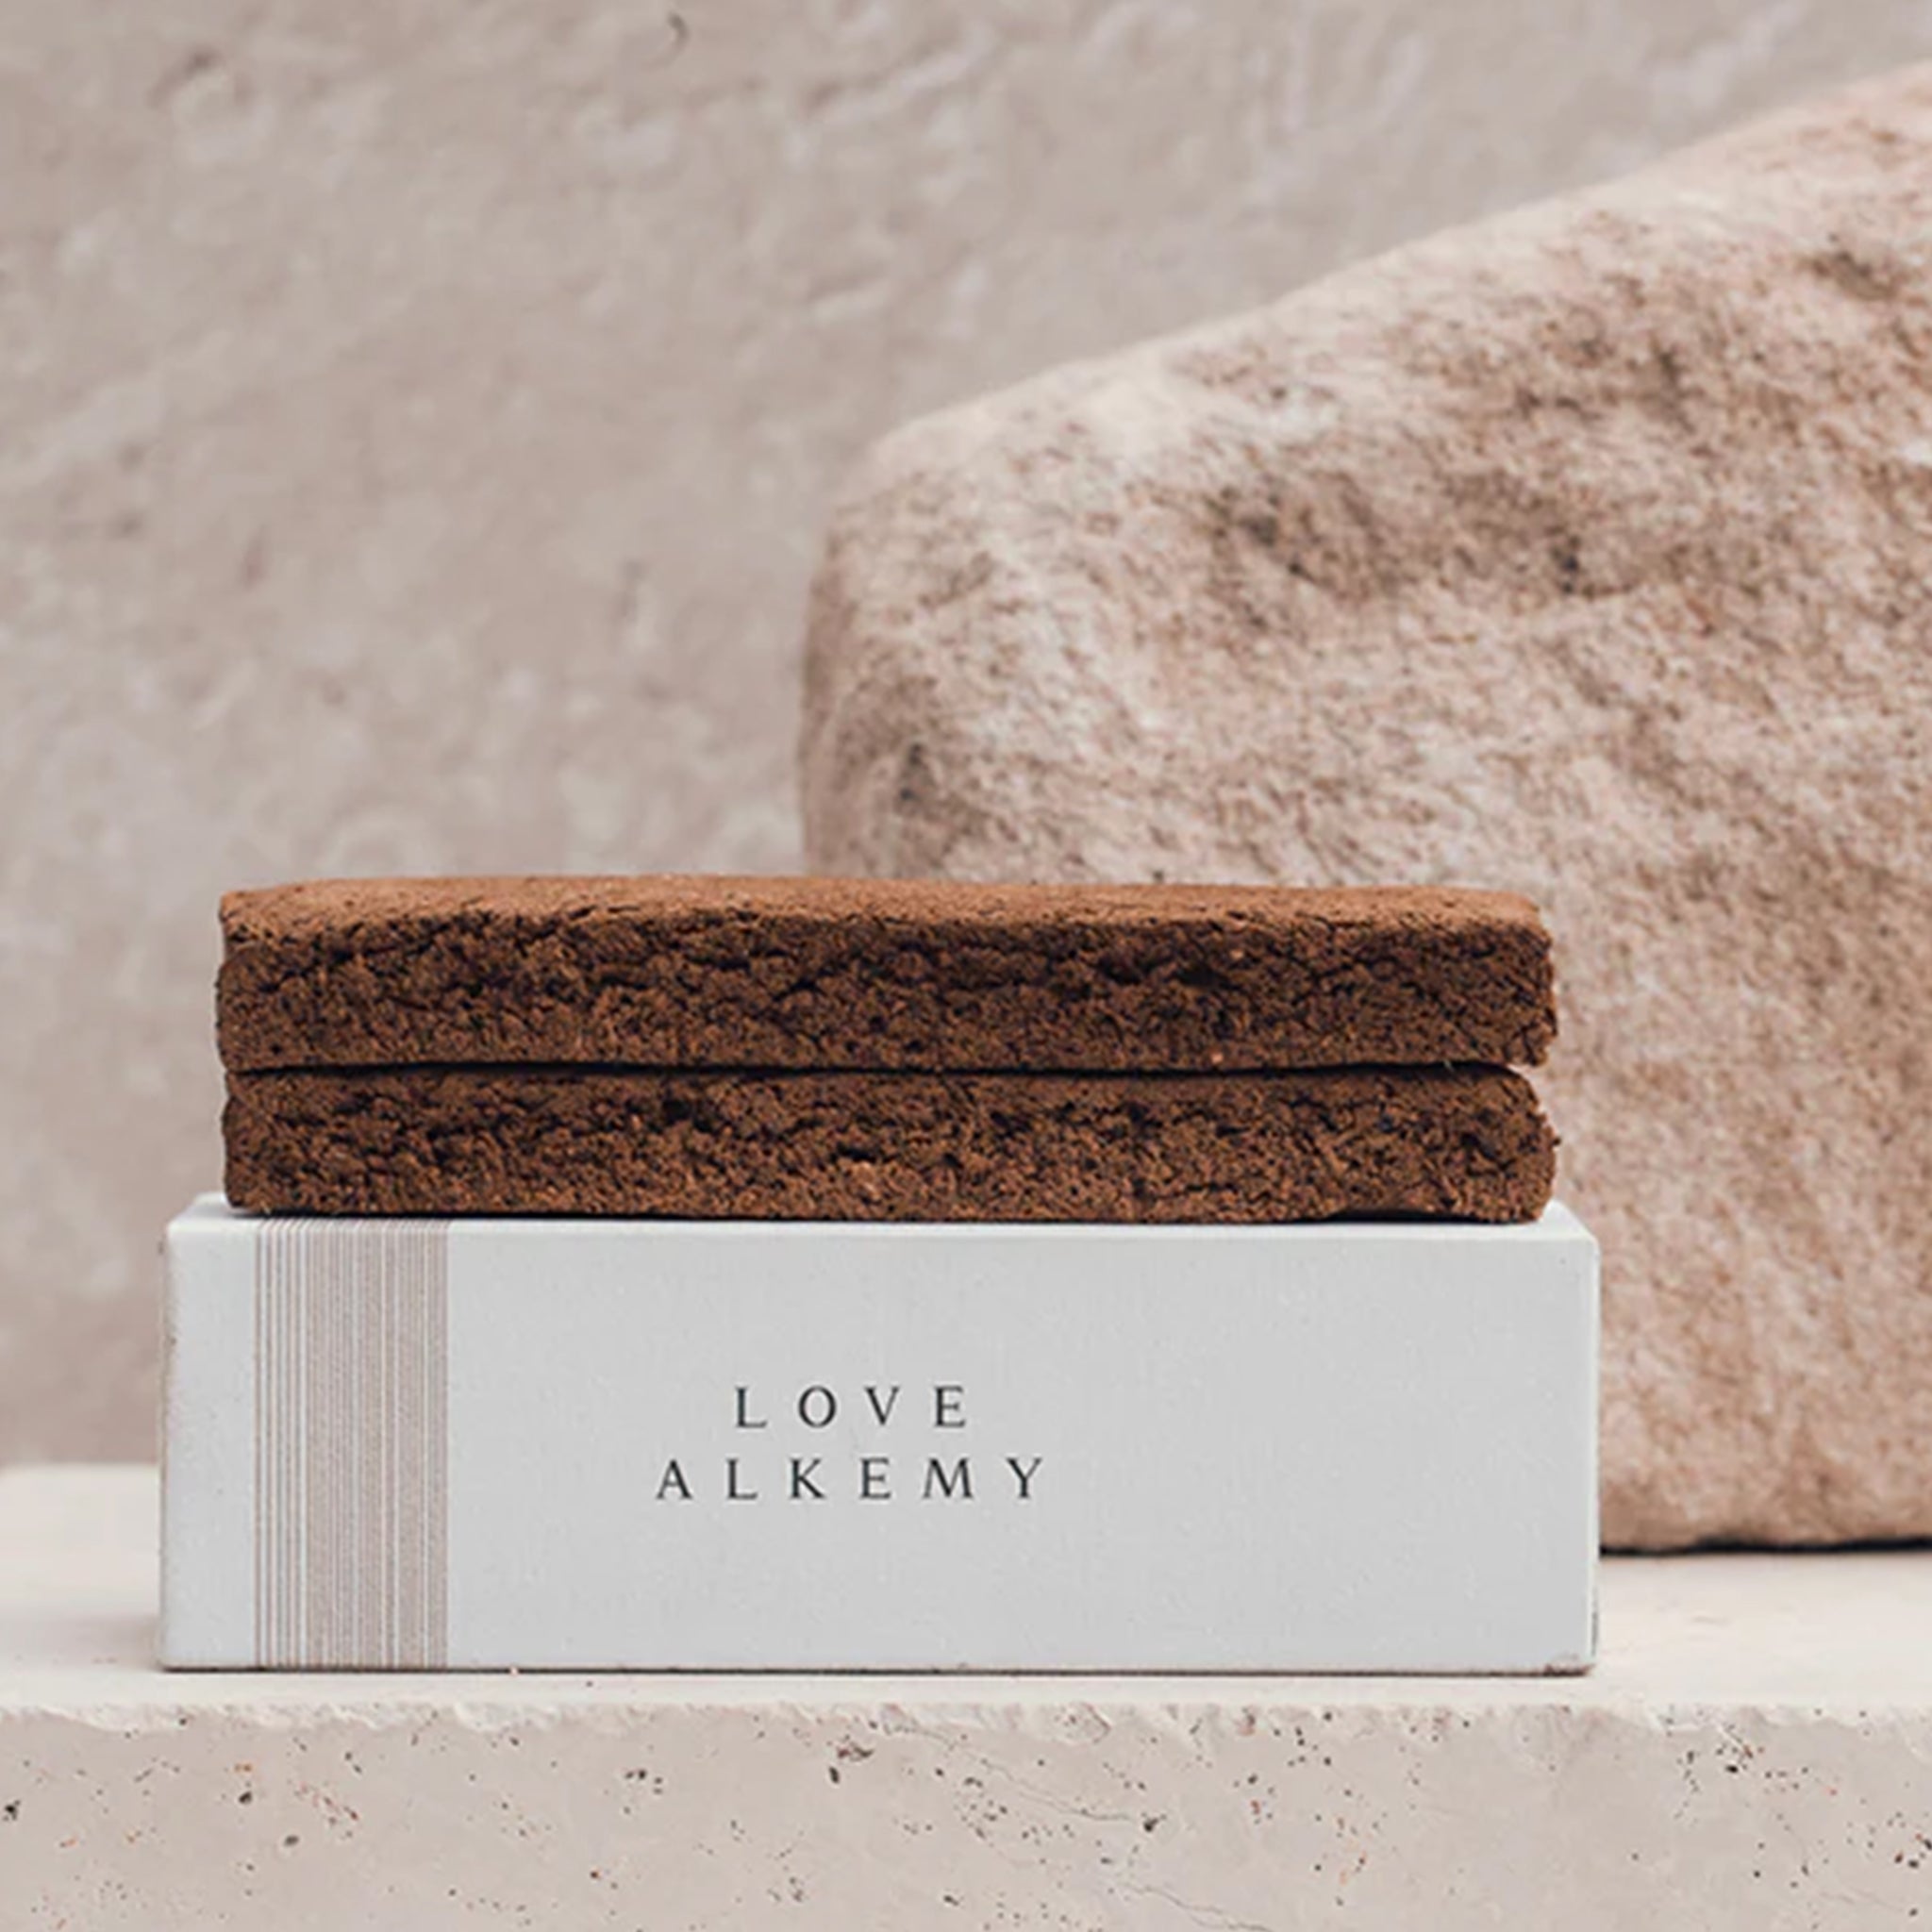 ROSE + TOBACCO INCENSE BY LOVE ALKEMY